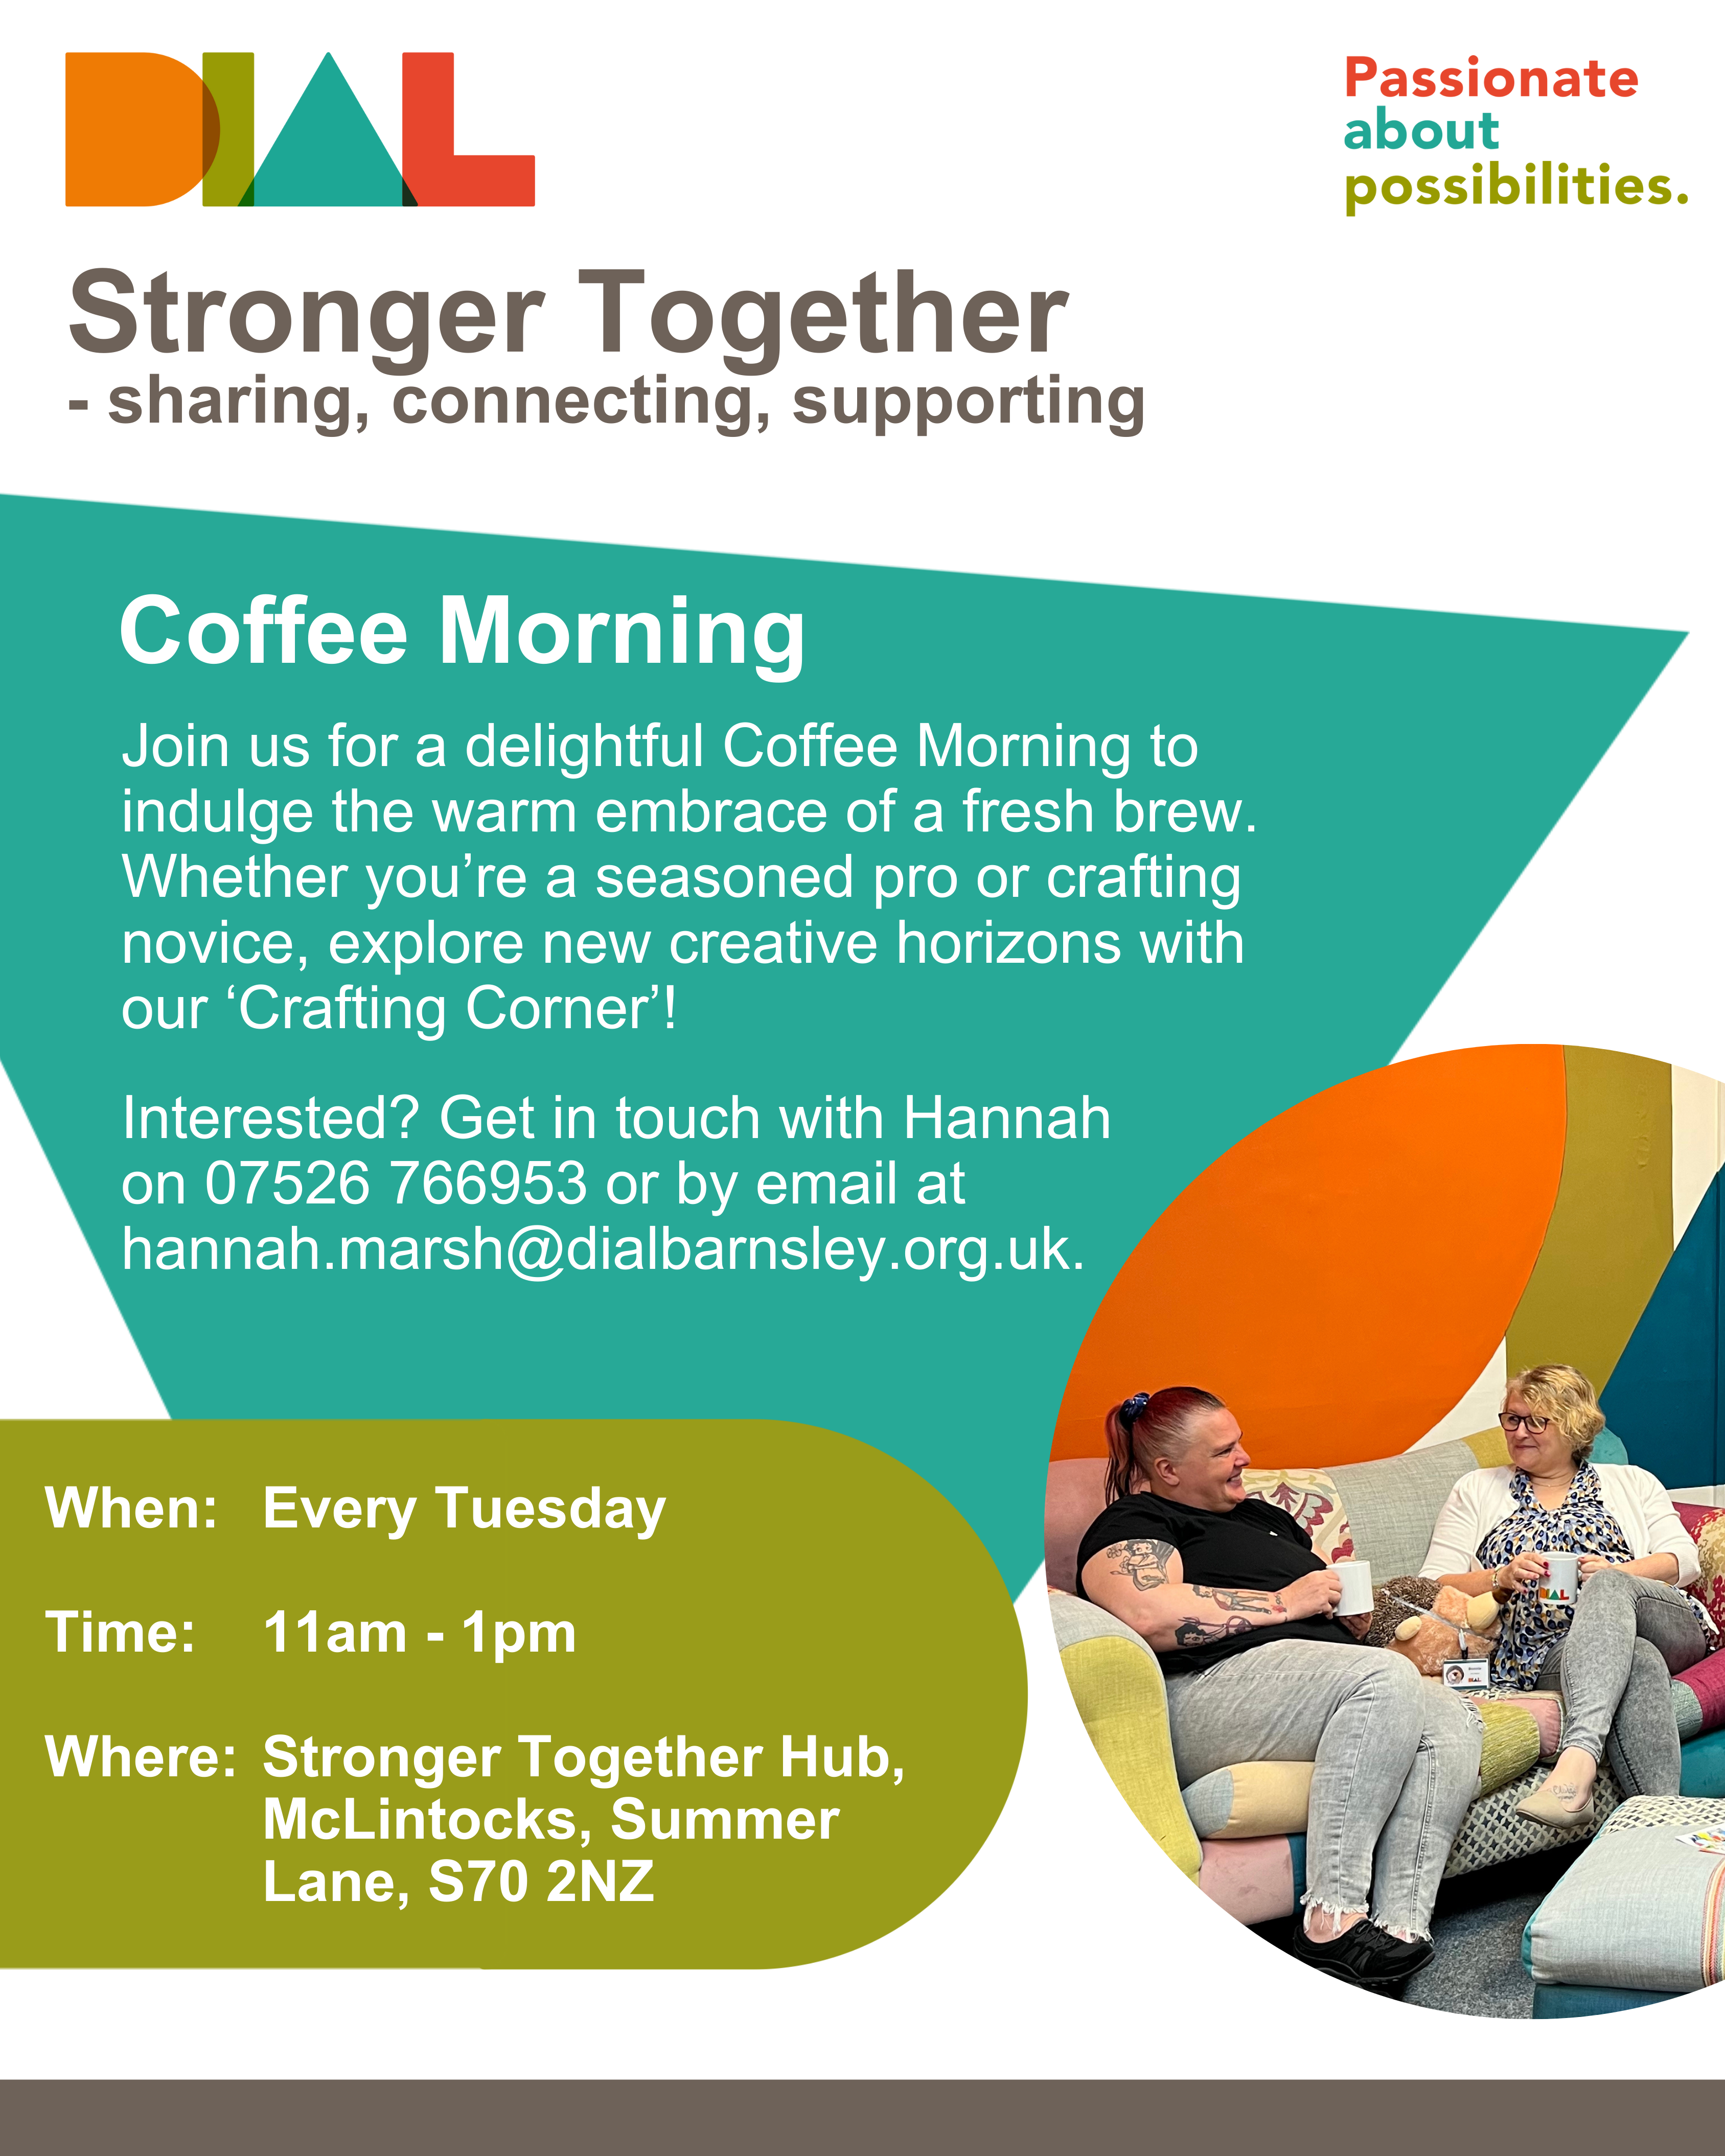 A poster for our Stronger Together Coffee Mornings. A white background and using DIAL colours of orange, green, teal and red. The poster includes the DIAL logo, each letter of DIAL being a different DIAL colour, and the tagline of ‘Passionate About Possibilities’. There is also an image of two white women sitting on the colourful patchwork sofa in our Stronger Together Hub, having a cuppa and chatting.The poster reads: Stronger Together - sharing, connecting, supporting. Join us for a delightful coffee morning to indulge the warm embrace of a fresh brew. Whether you’re a seasoned pro or crafting novice, explore new creative horizons with our ‘Crafting Corner’!Interested? Get in touch with Hannah on 07526 766953 or by email at hannah.marsh@dialbarnsley.org.uk.When: Weekly on a Tuesday, 11am - 1pm.
Where: Stronger Together Hub, DIAL Office, McLintocks, Summer Lane, S70 2NZ.